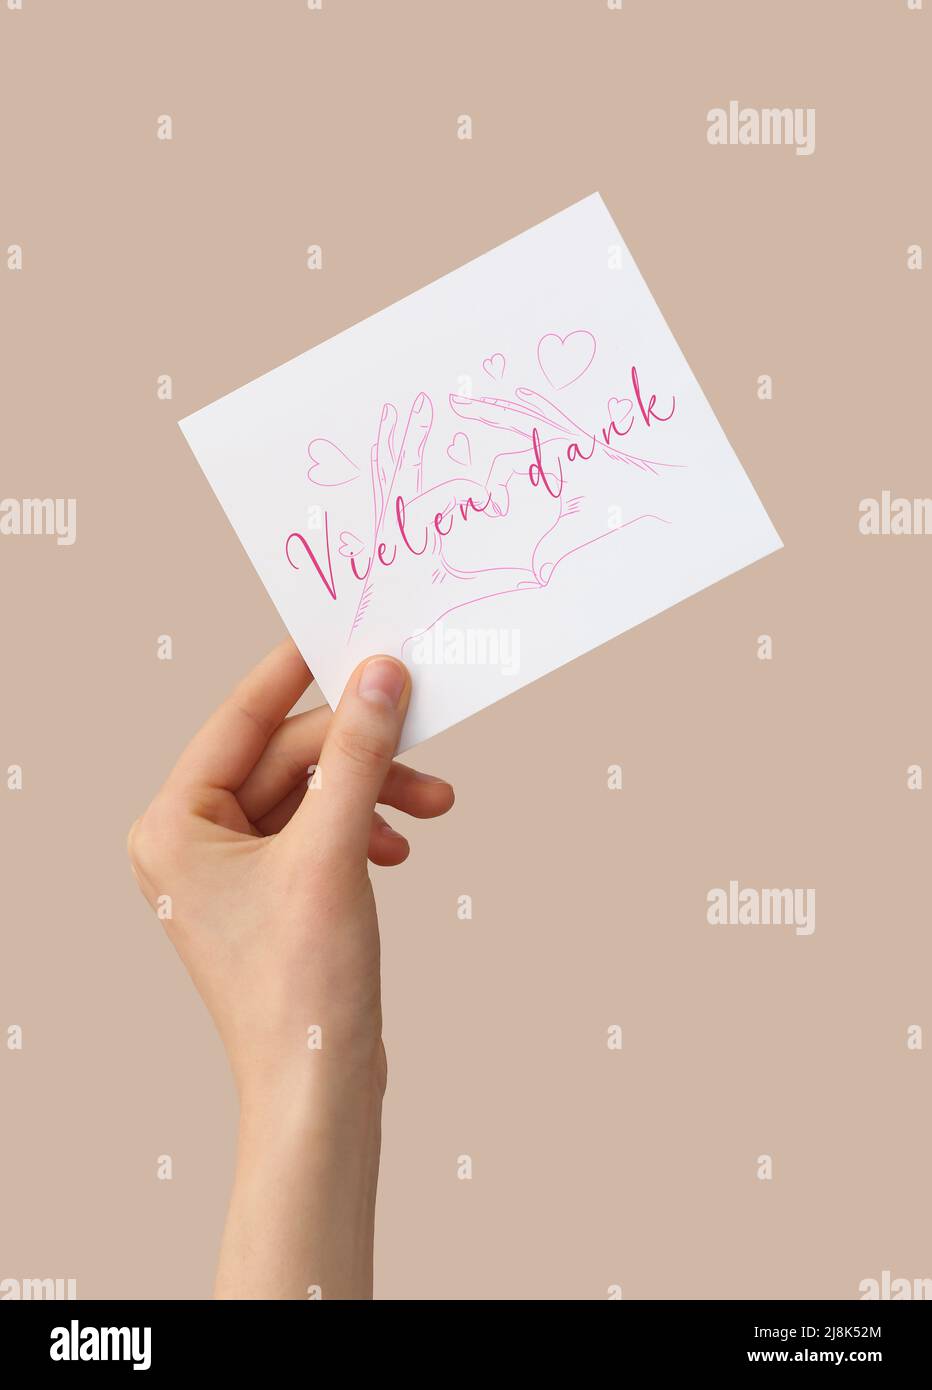 Female hand holding card with text VIELEN DANK (German for Thanks a lot) on color background Stock Photo